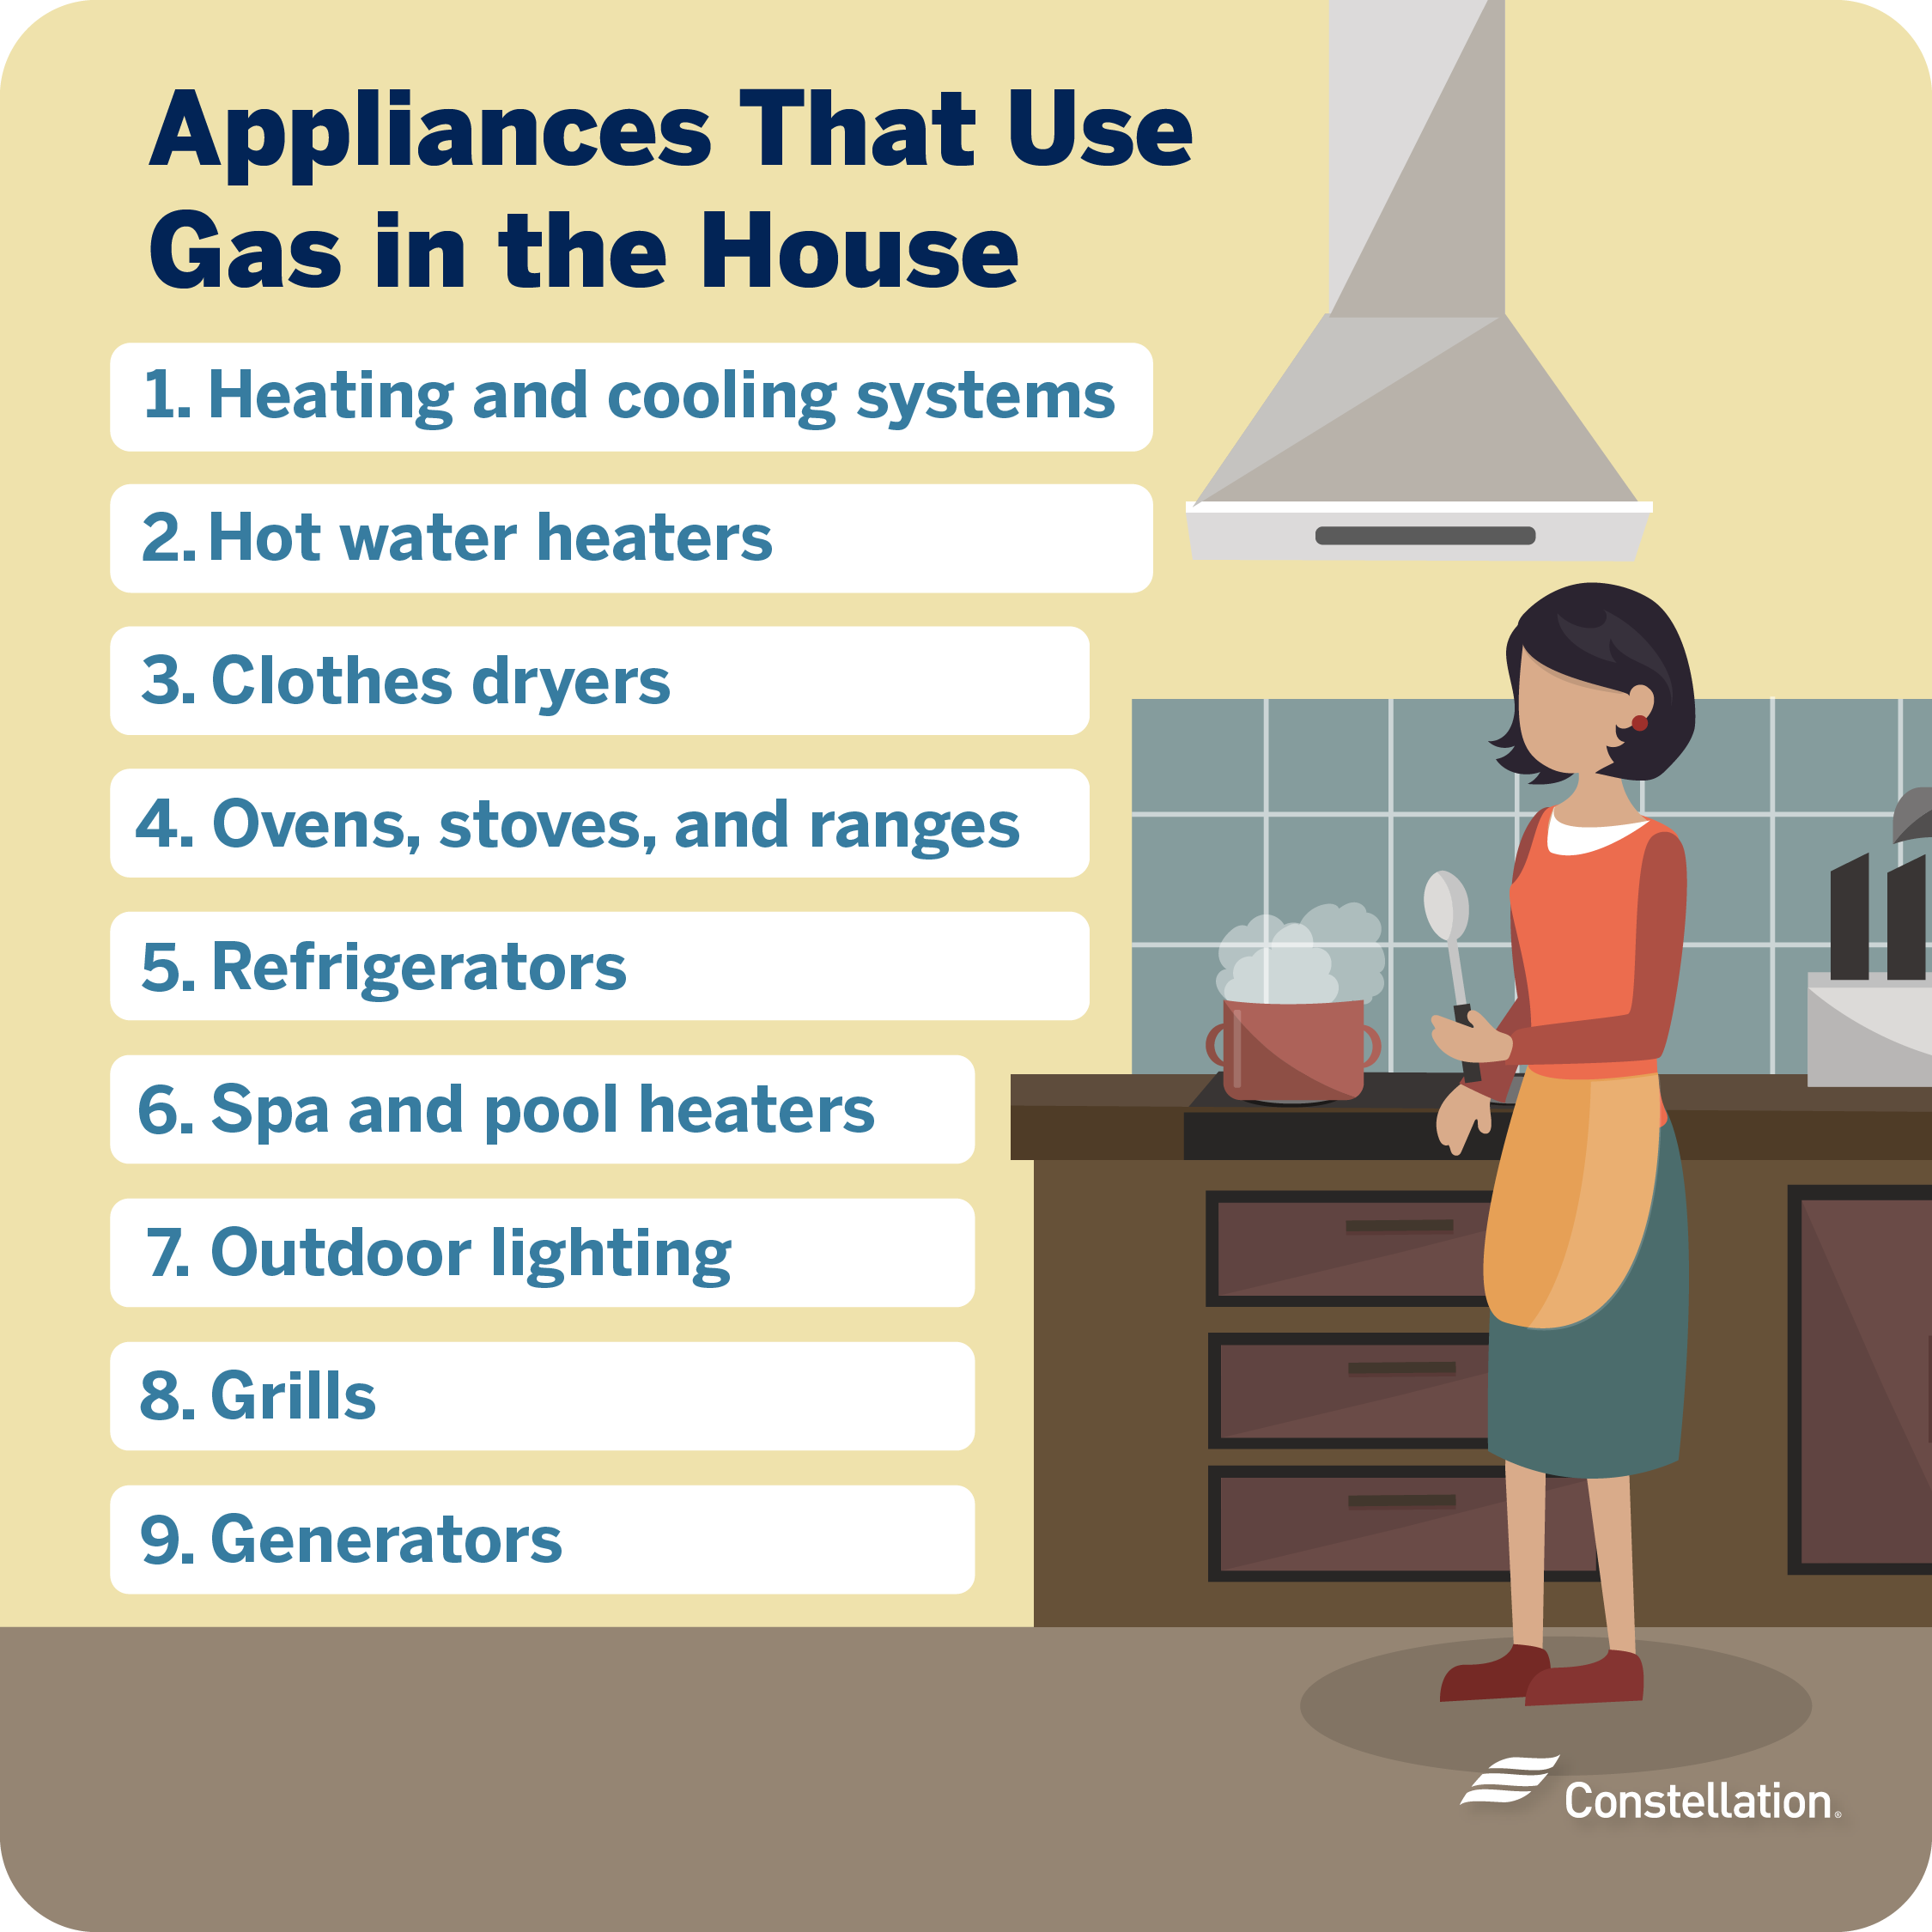 What appliances use gas in the house?